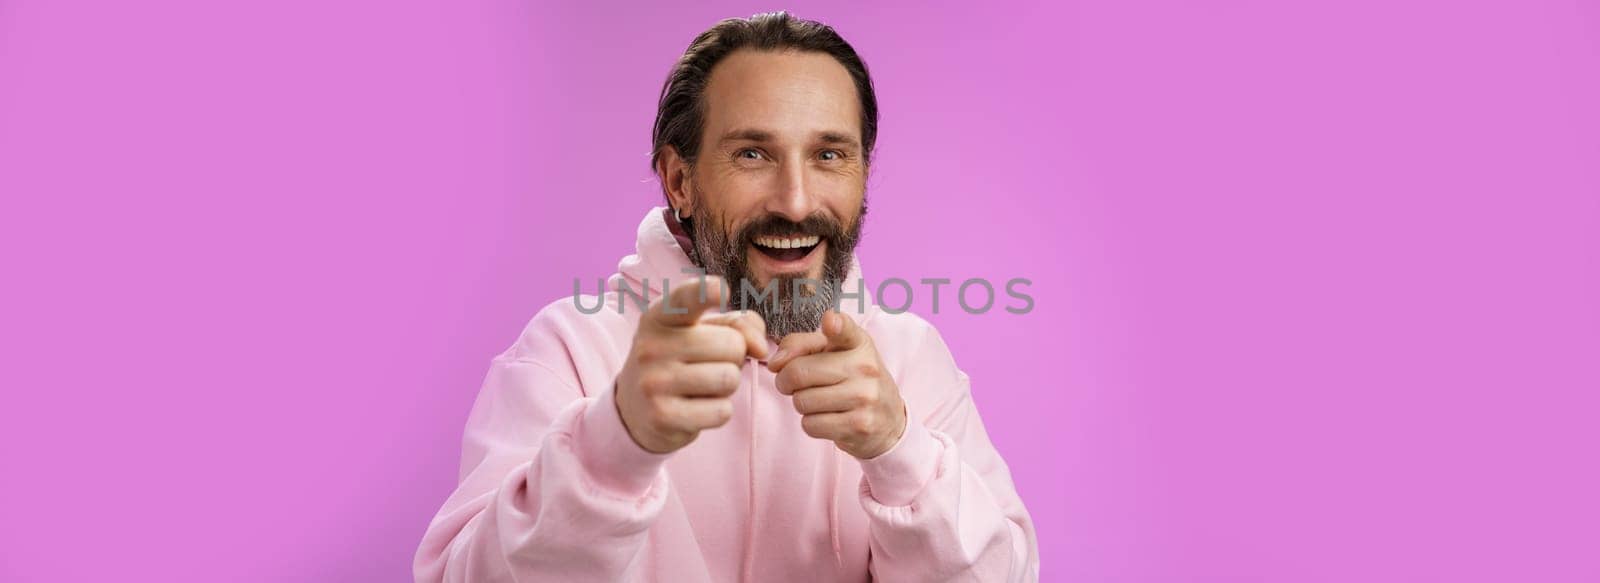 Funny amused carefree happy adult handsome man pranking friend fool around pointing camera index fingers greeting choosing you laughing joyfully having fu, standing purple background rejoicing.